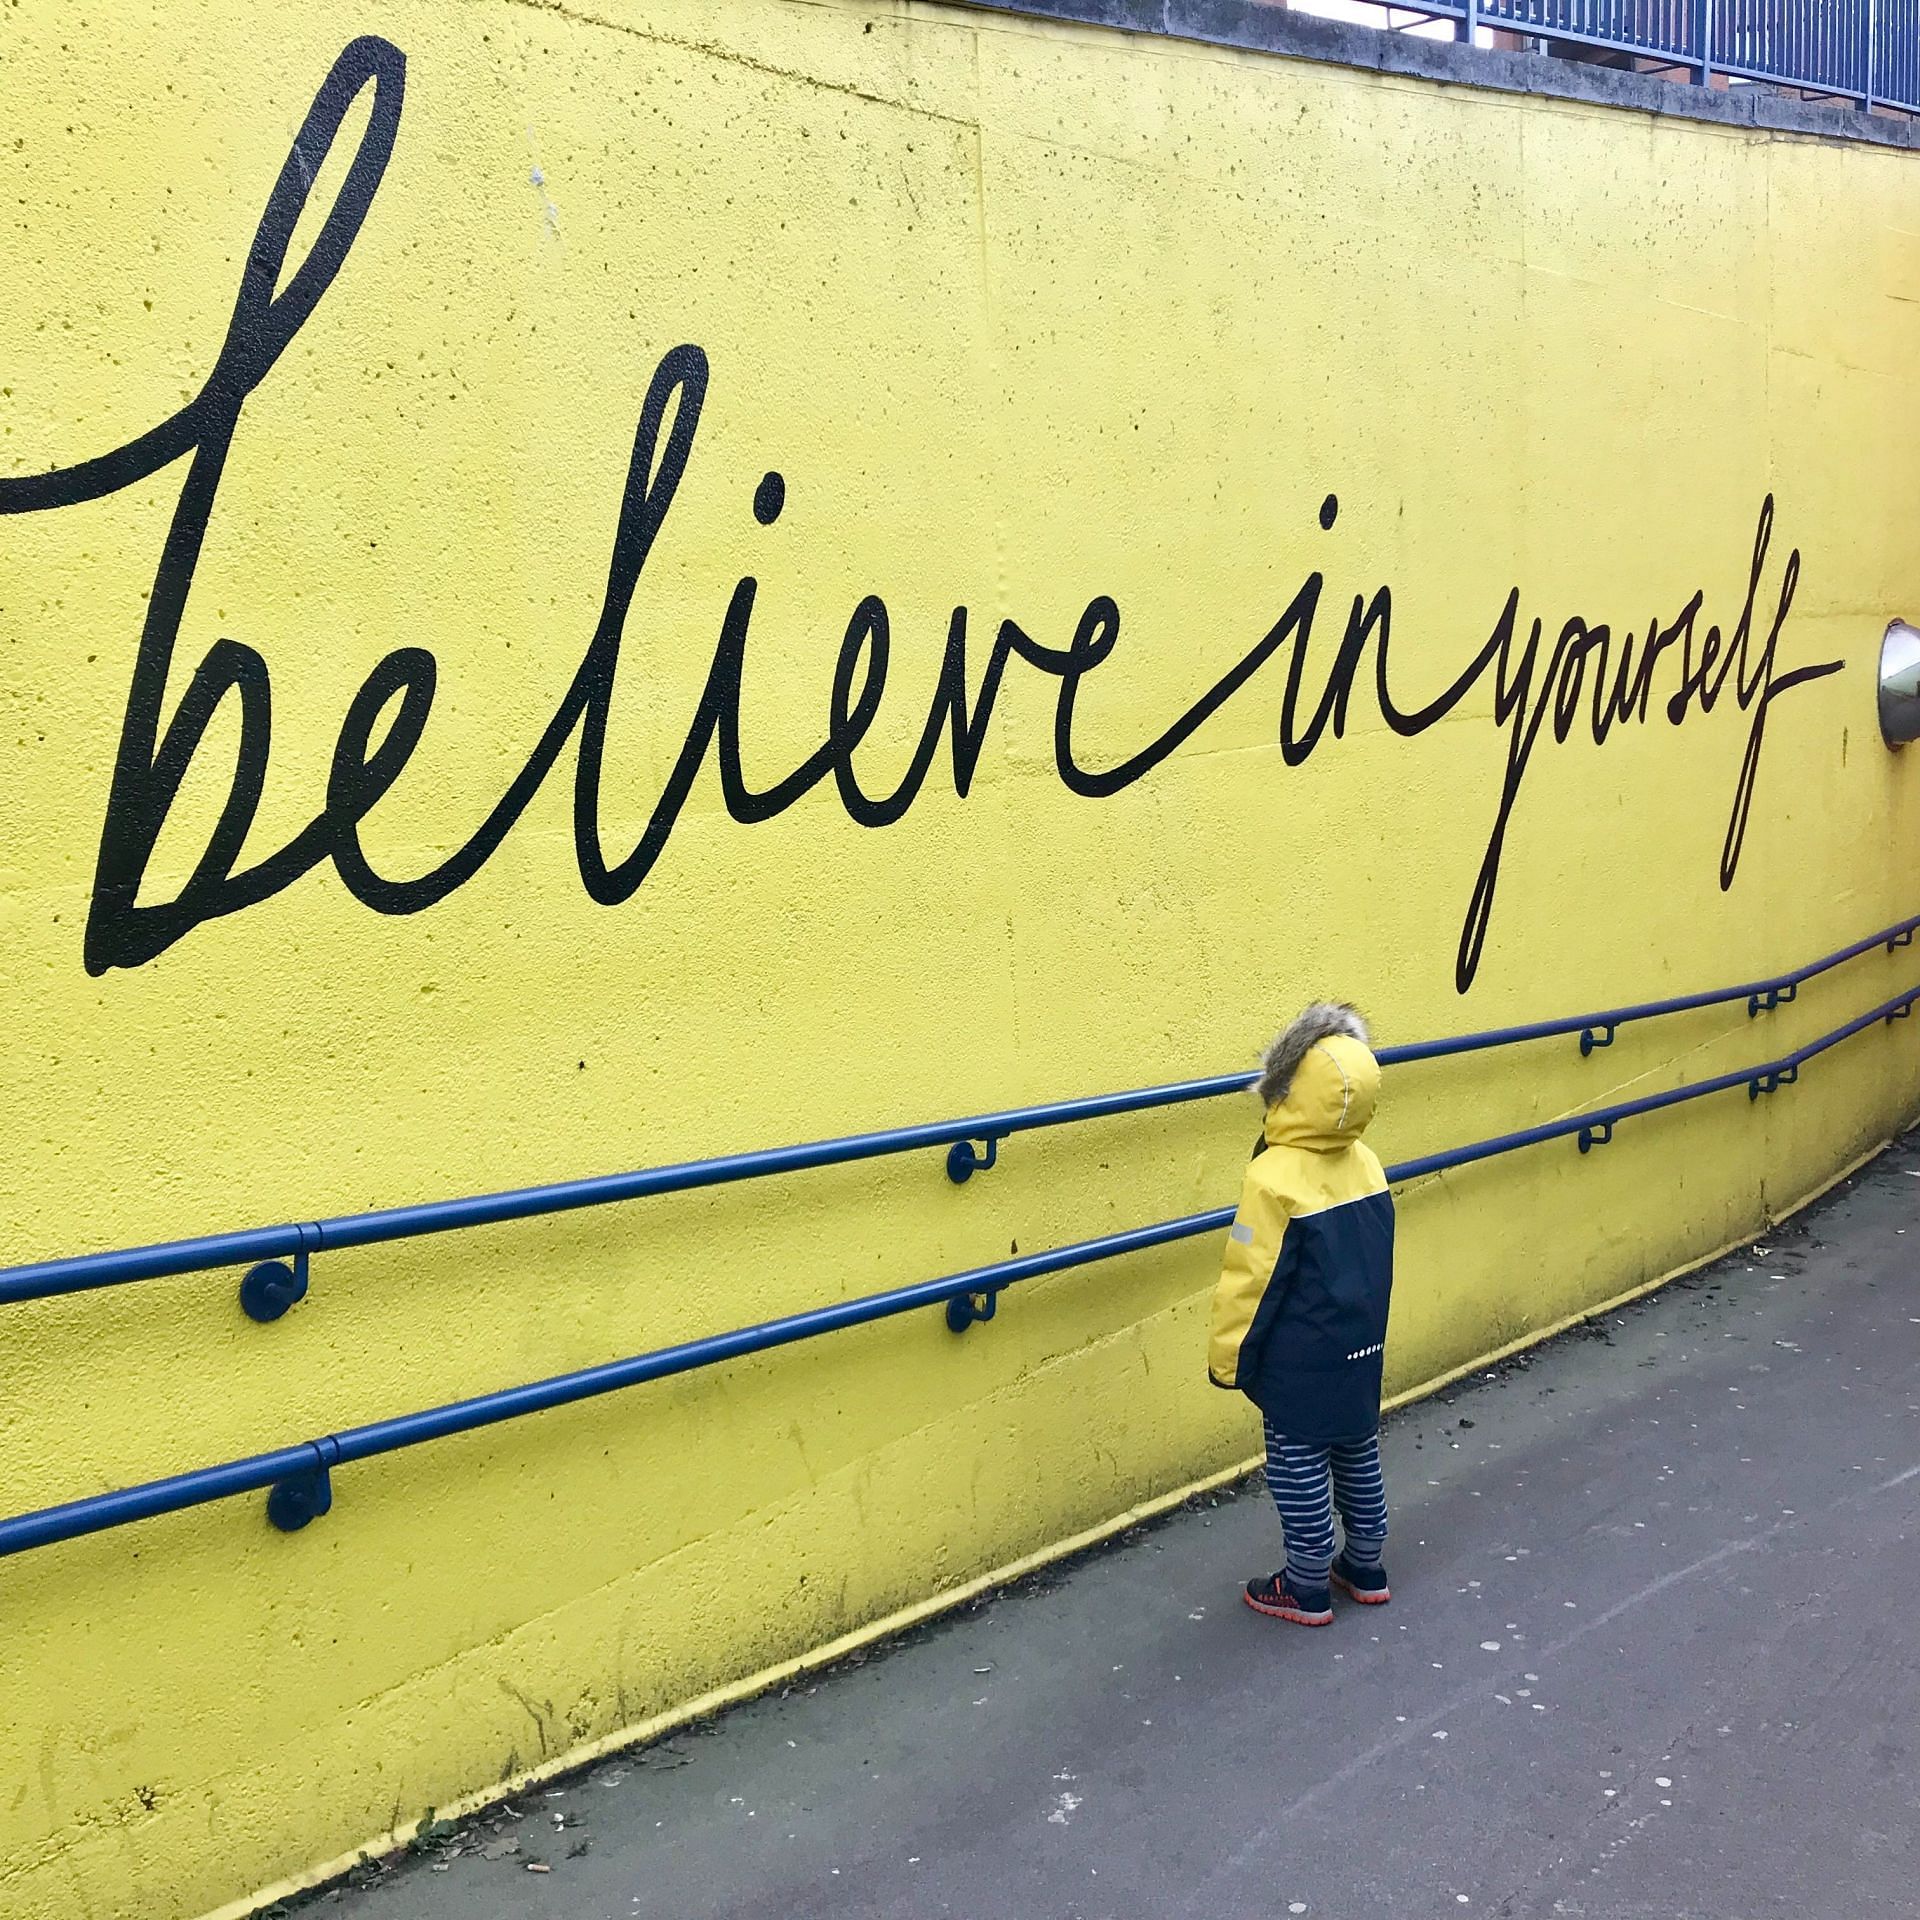 Believe in yourself as much as you can. (Image via Unsplash/ Katrina Wright)